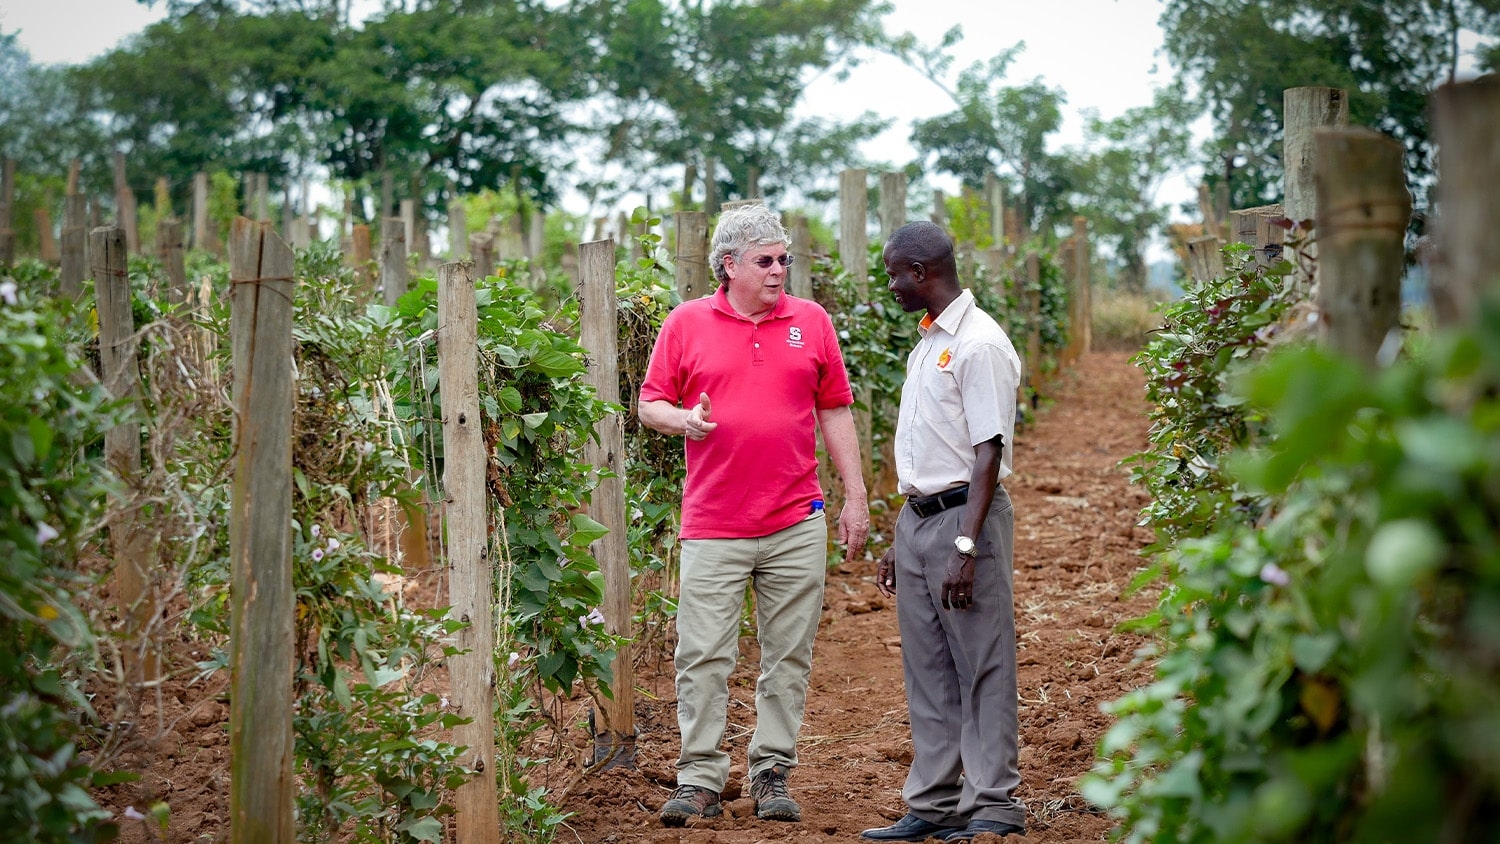 Craig Yencho speaks with a crop researcher in Africa